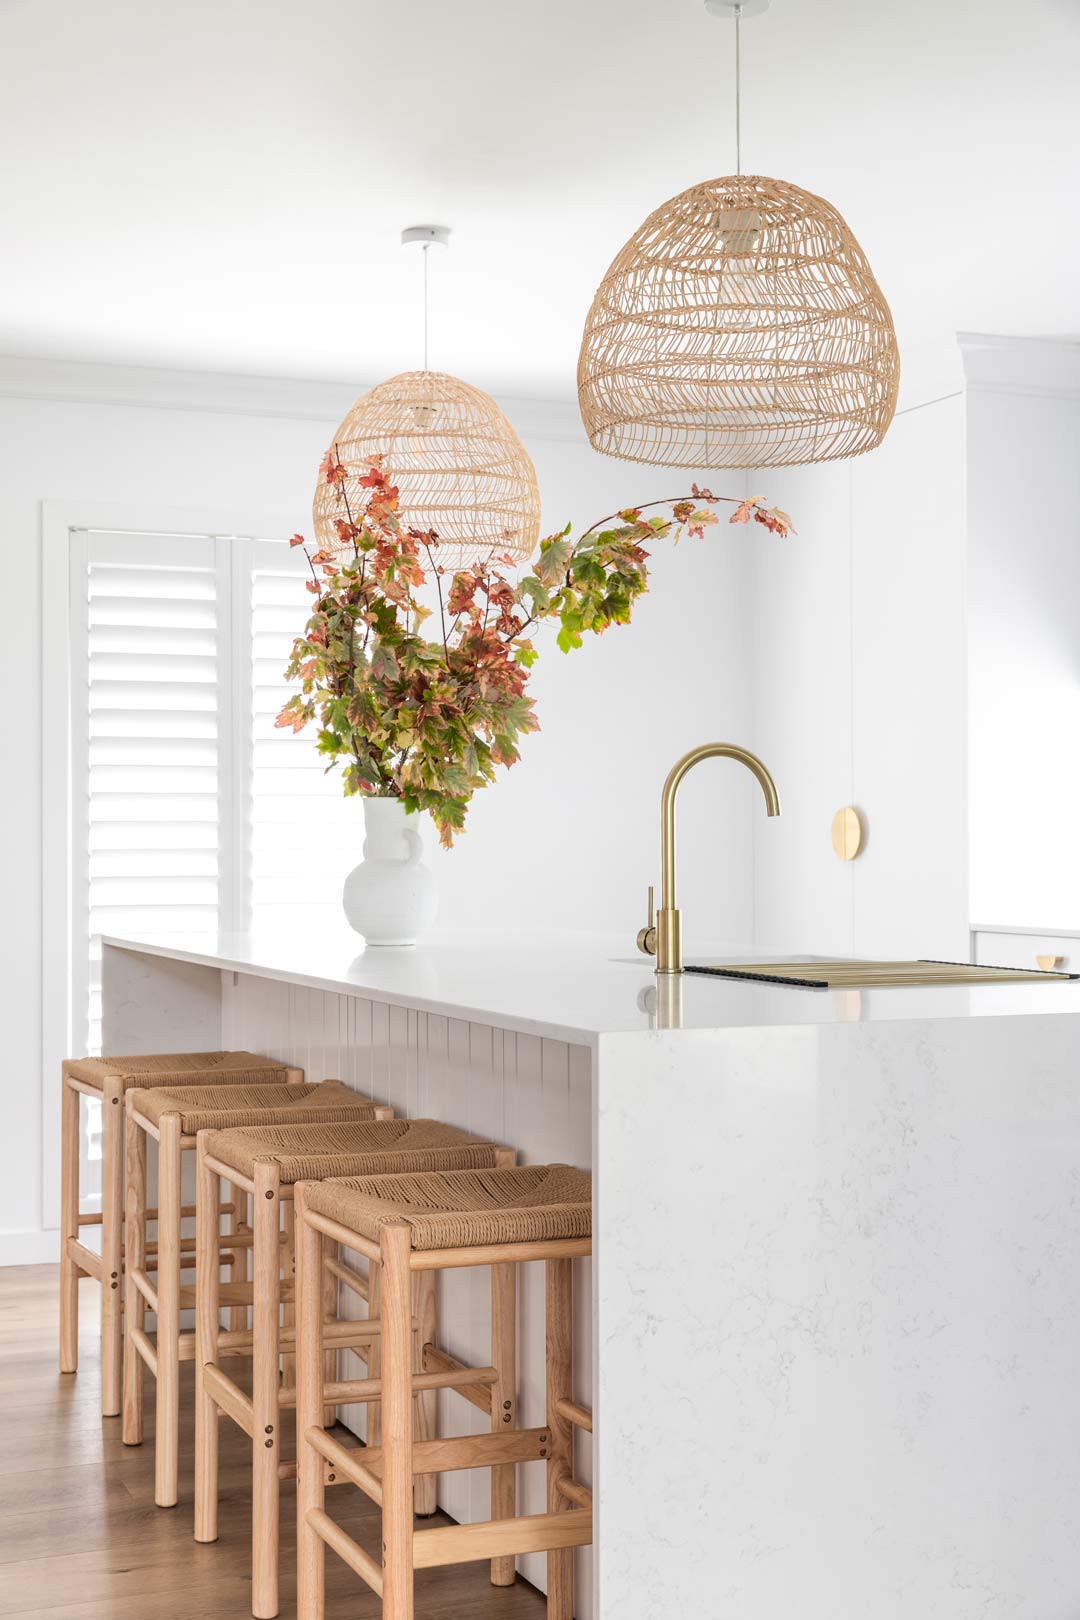 Calm Coastal simple look for refurbishing a kitchen brushed brass tapware and cabinetry pulls